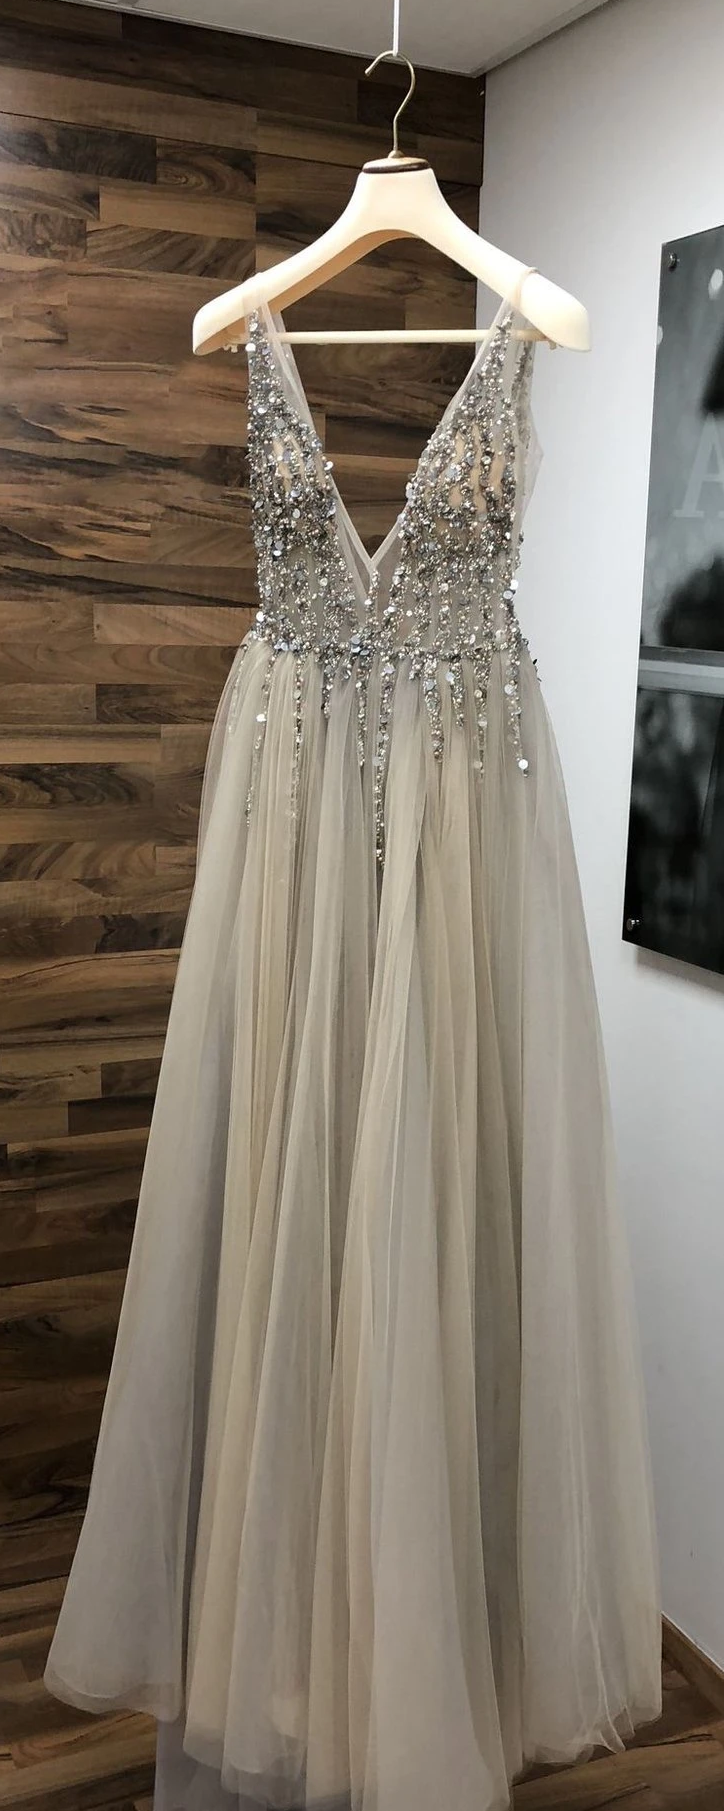 Affordable Prom Dress Sheer Top, Evening Dress ,Winter Formal Dress, Pageant Dance Dresses, Graduation School Party Gown, PC0285 - Promcoming